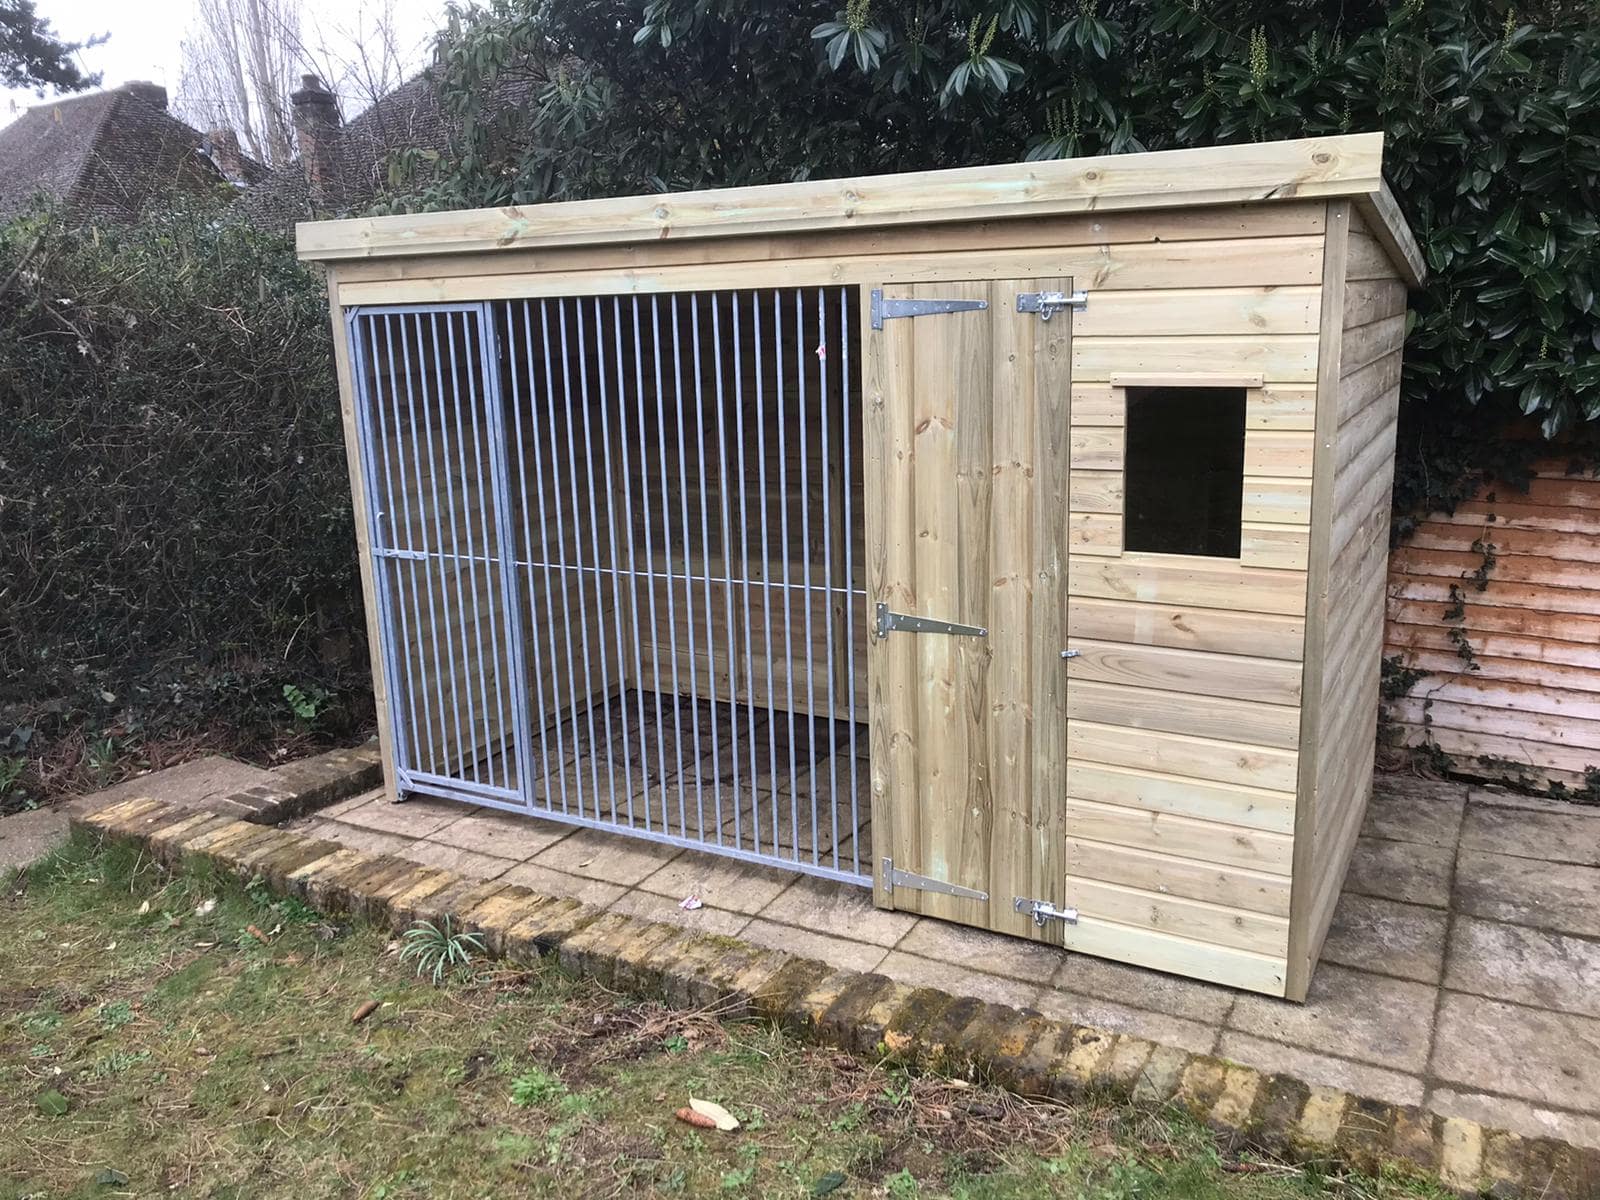 Stapeley Dog Kennel 8ft (wide) x 5ft (deep) x 6'6ft (high)